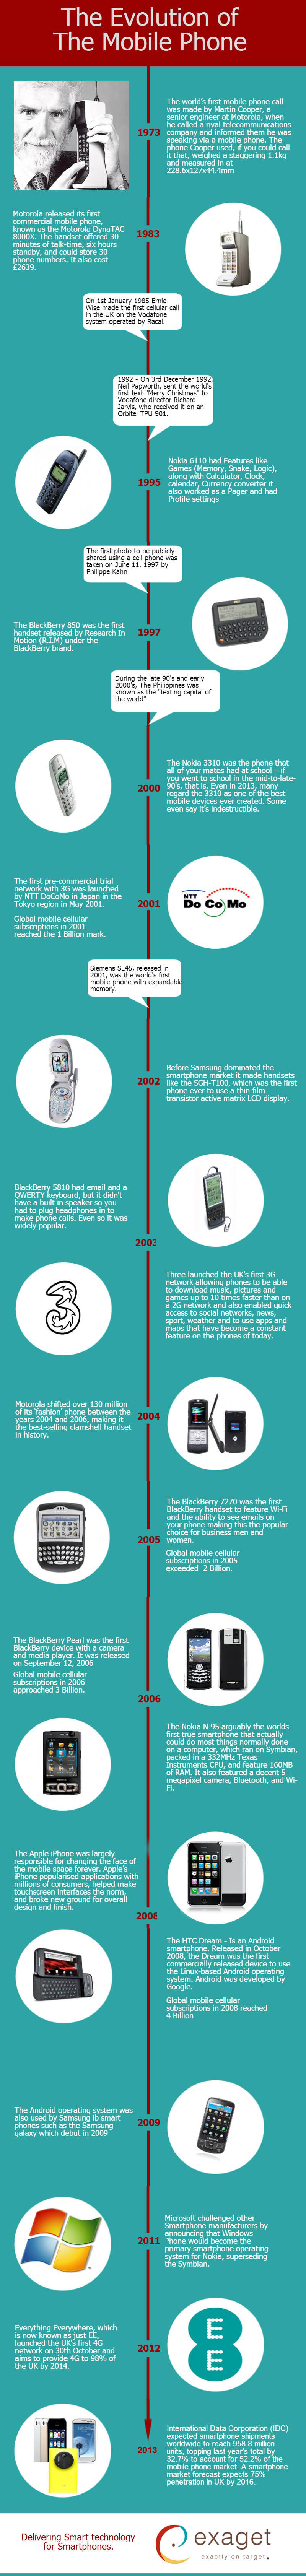 evolution-of-mobile-phones-infographic